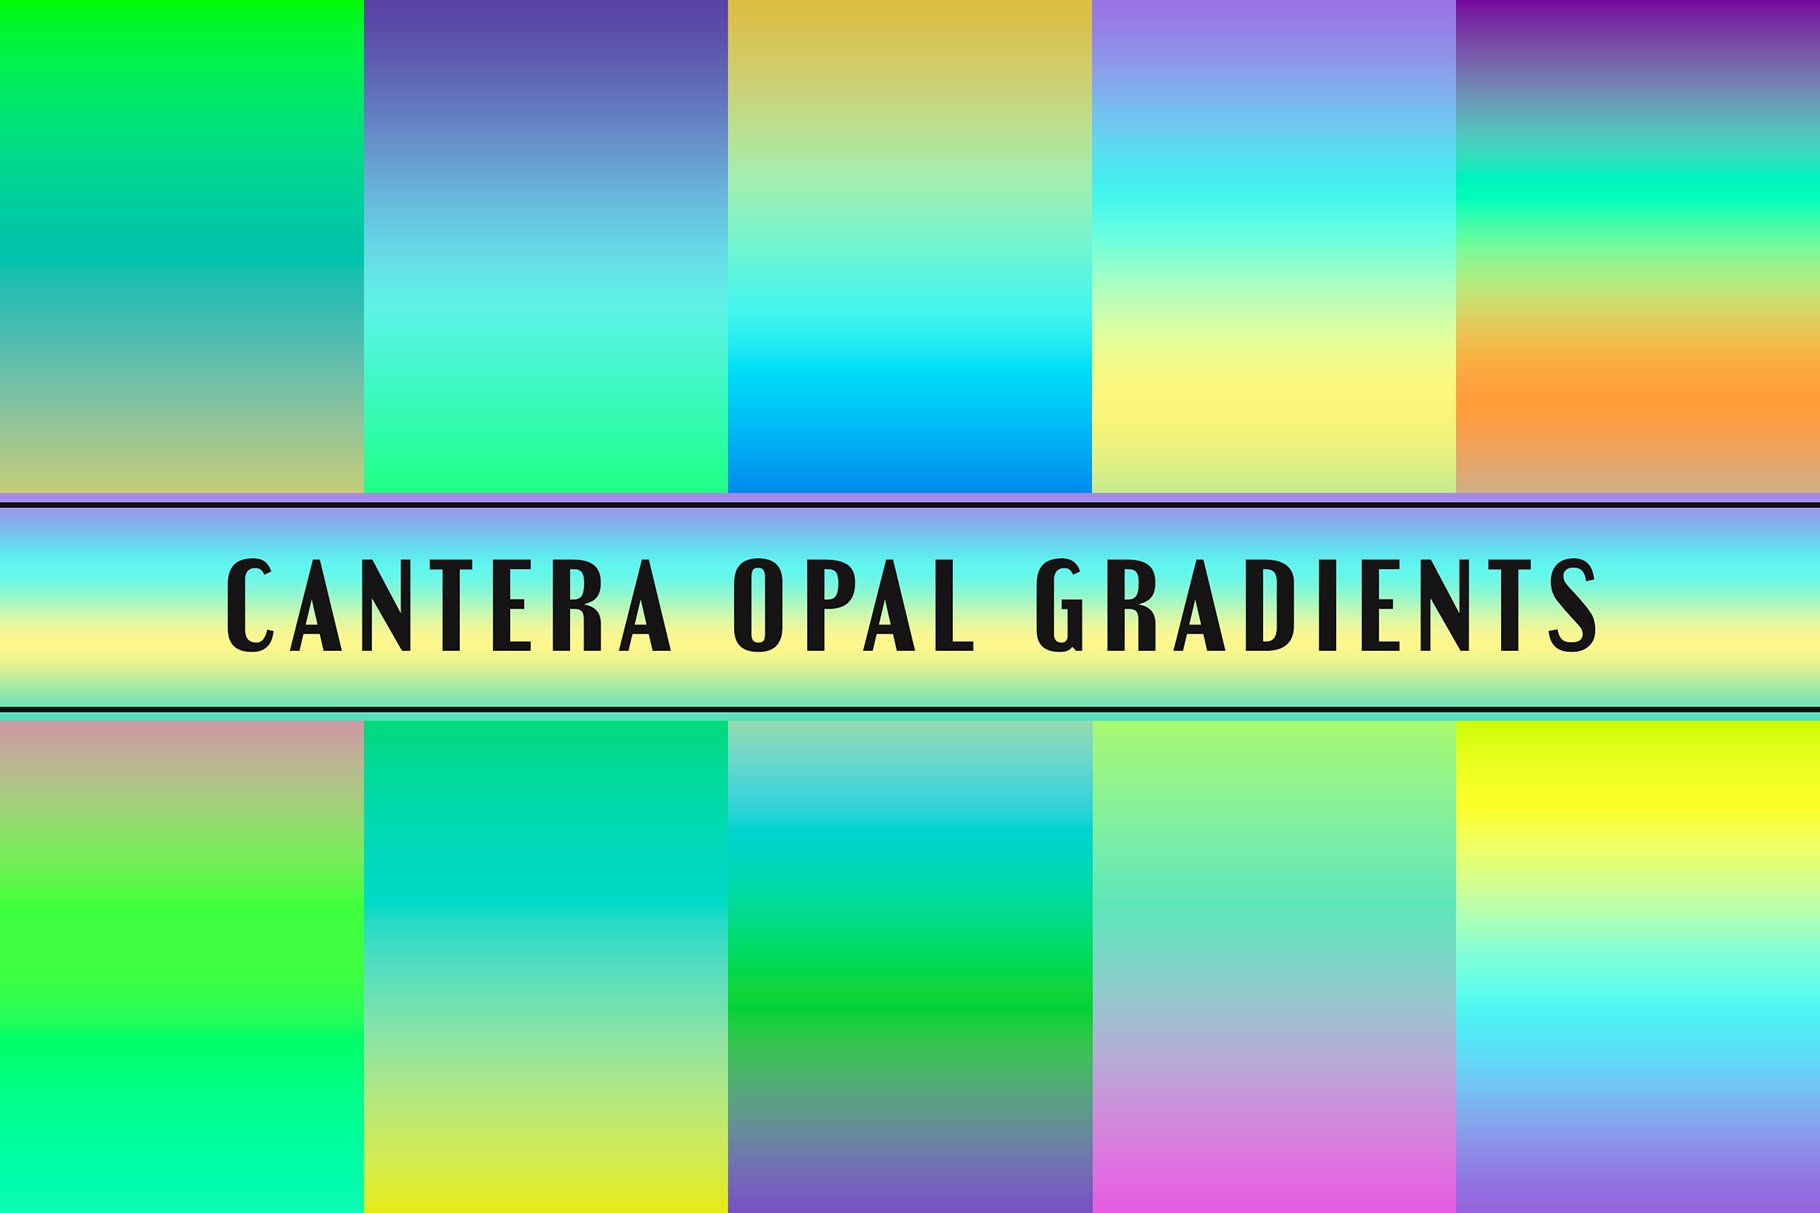 Cantera Opal Gradients cover image.